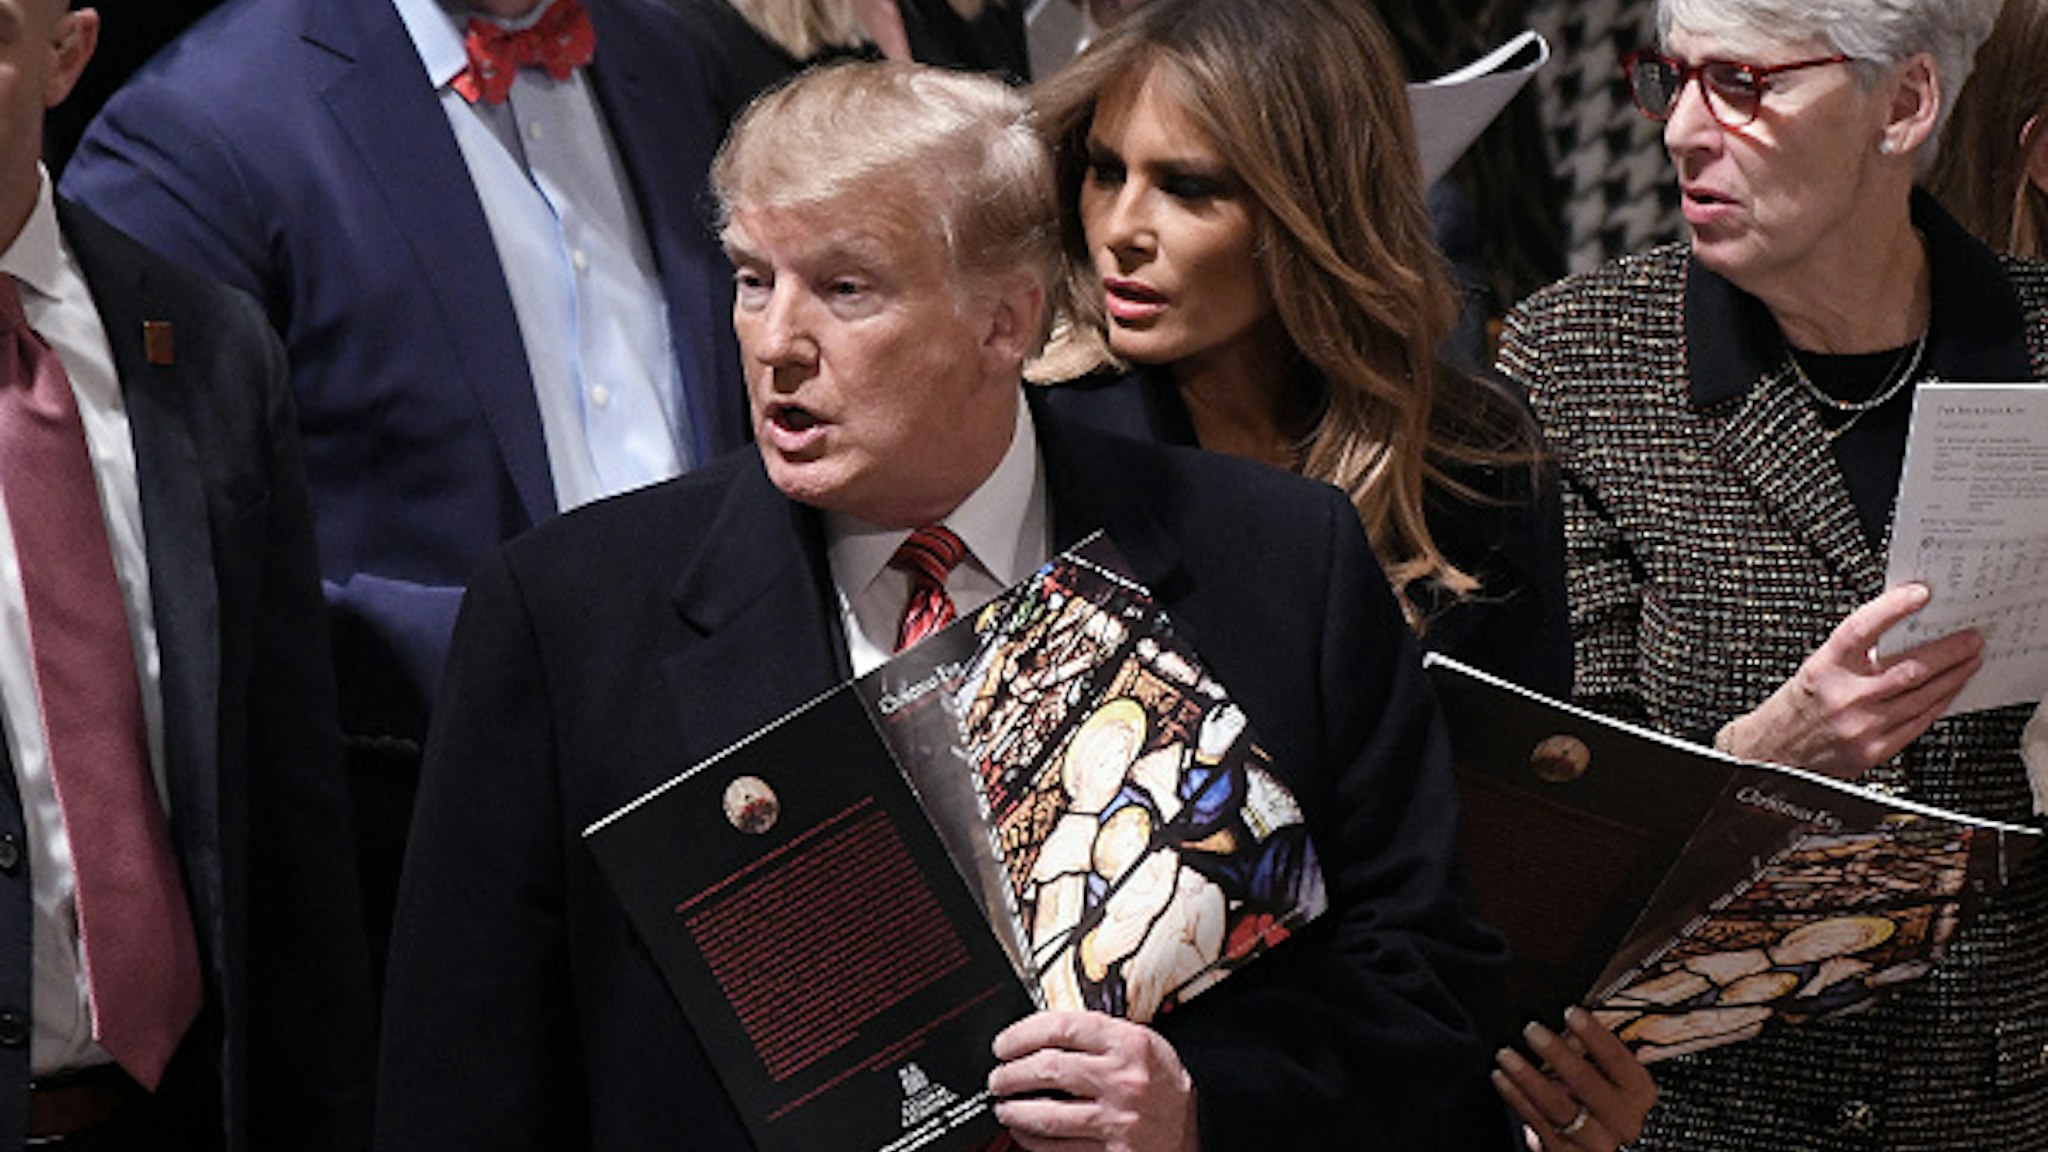 WASHINGTON, DC - DECEMBER 24: U.S. President Donald Trump and first lady Melania Trump attend Christmas Eve services at the National Cathedral on December 24, 2018 in Washington, D.C.